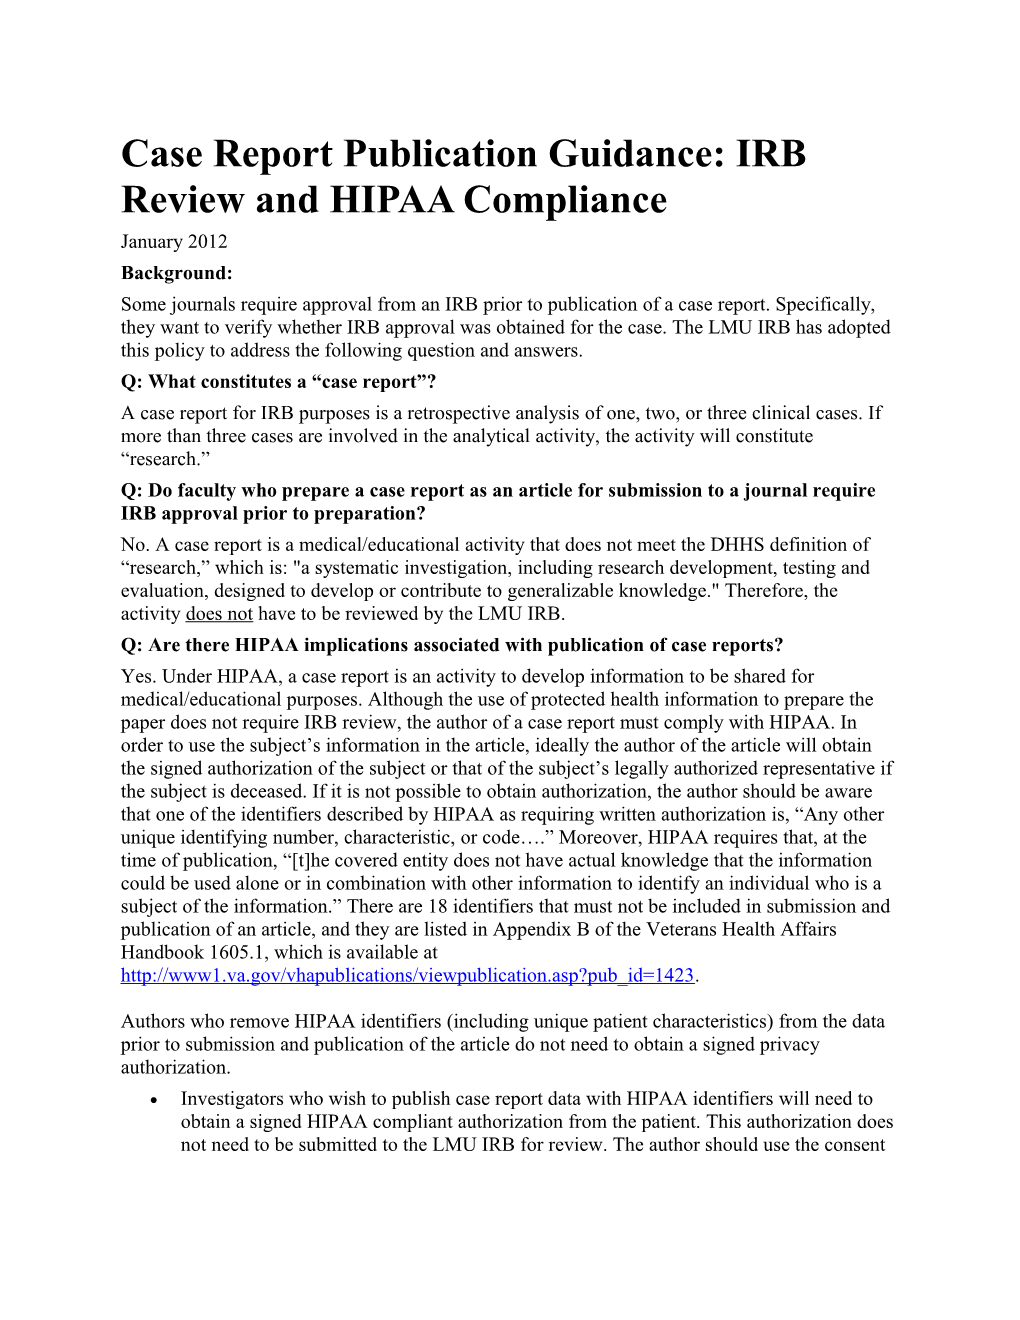 Case Report Publication Guidance: IRB Review and HIPAA Compliance